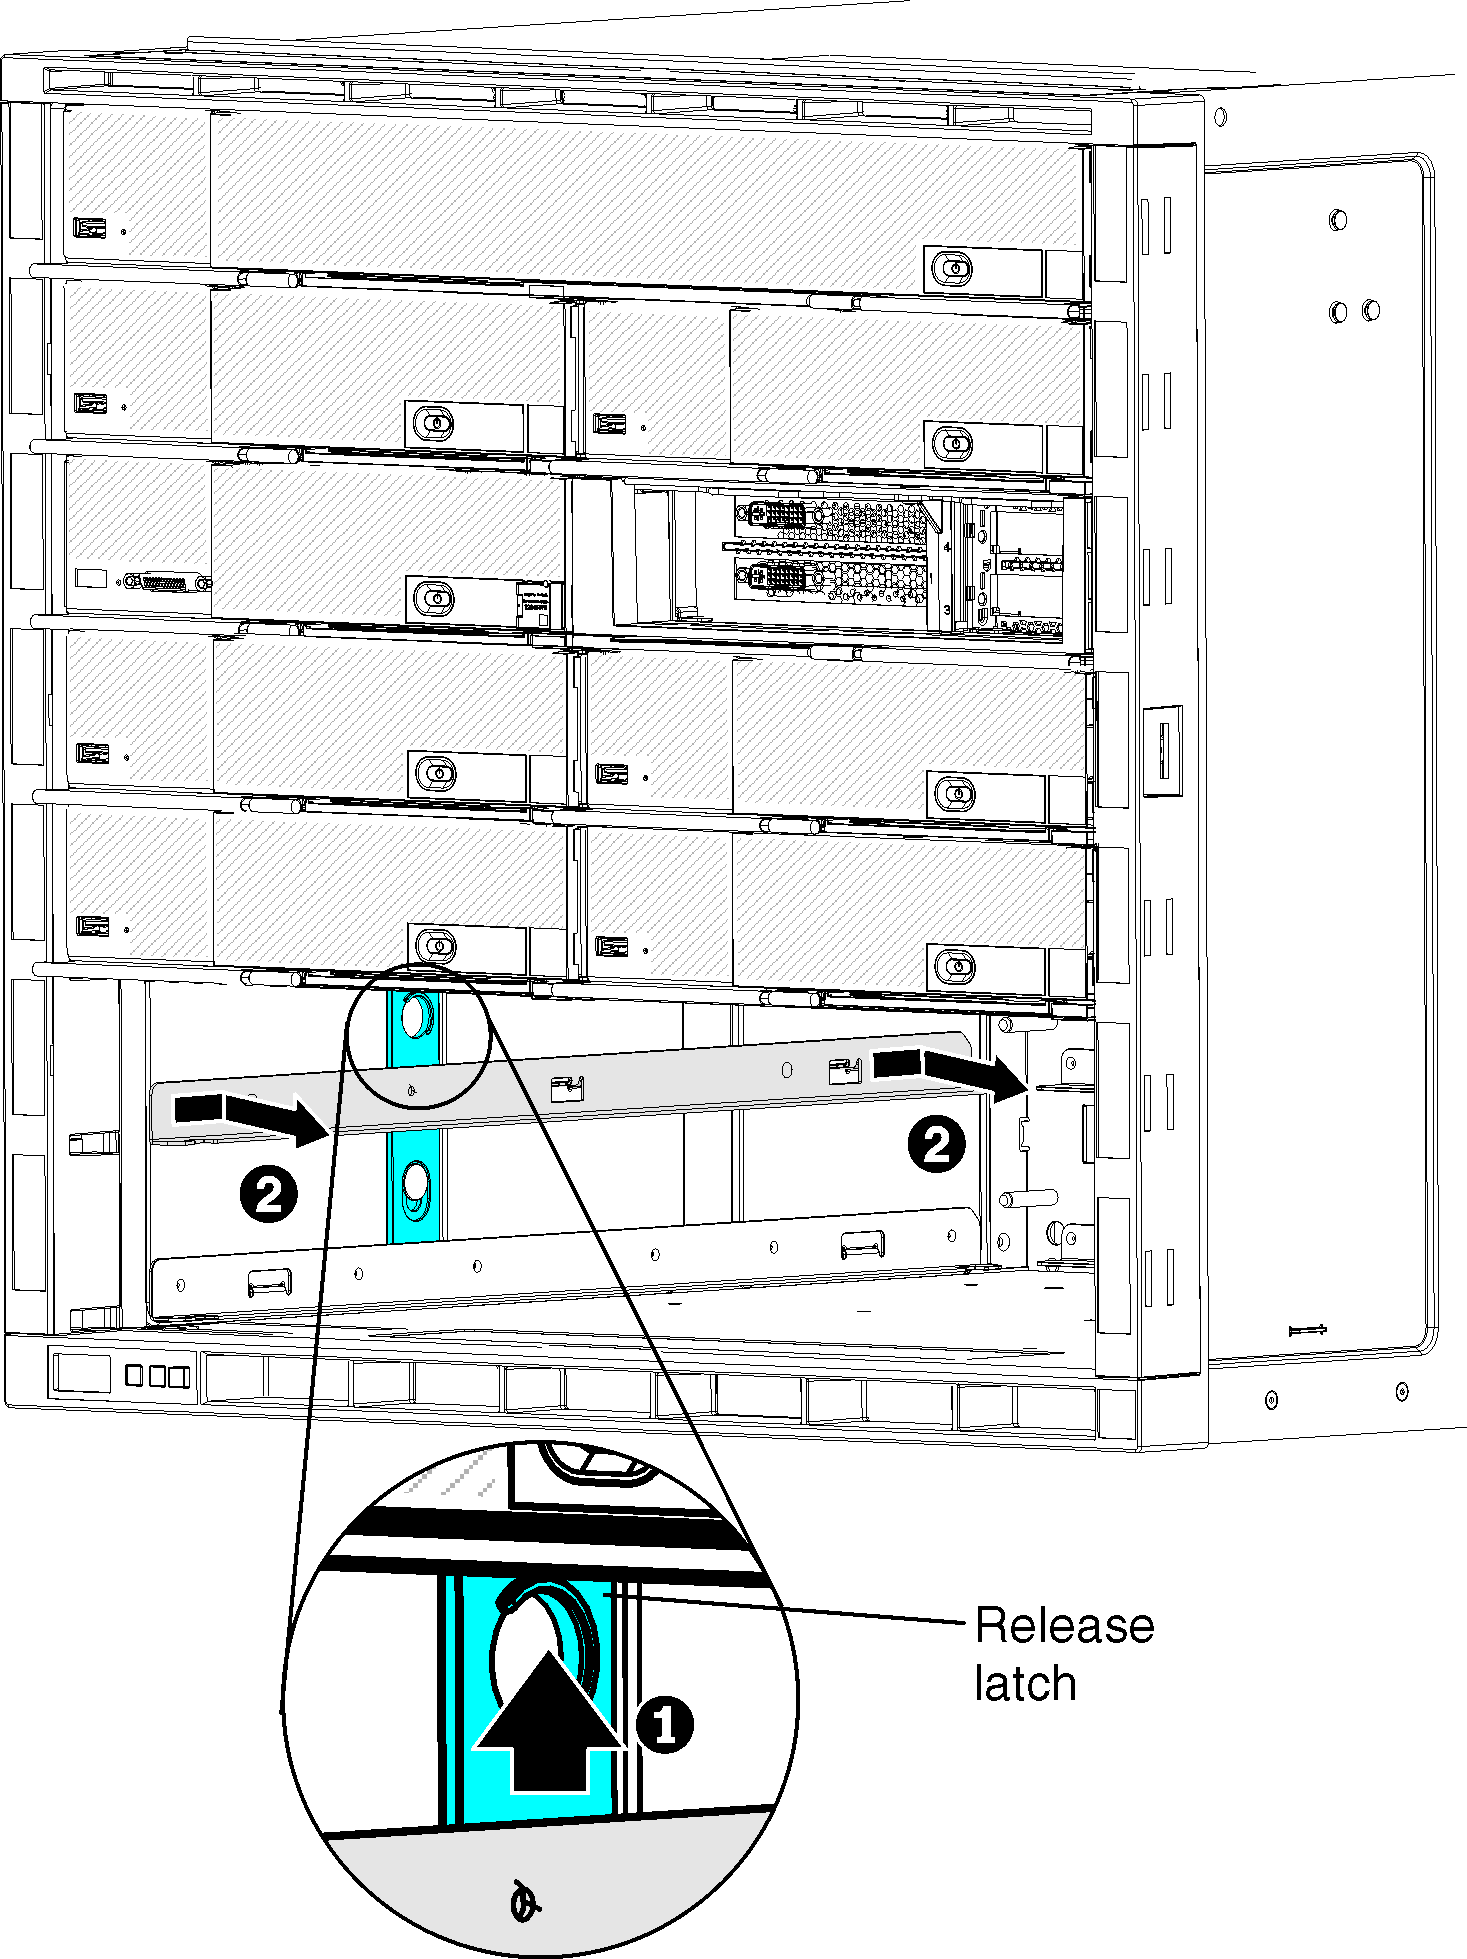 Graphic illustrating the removal of a shelf support from the chassis